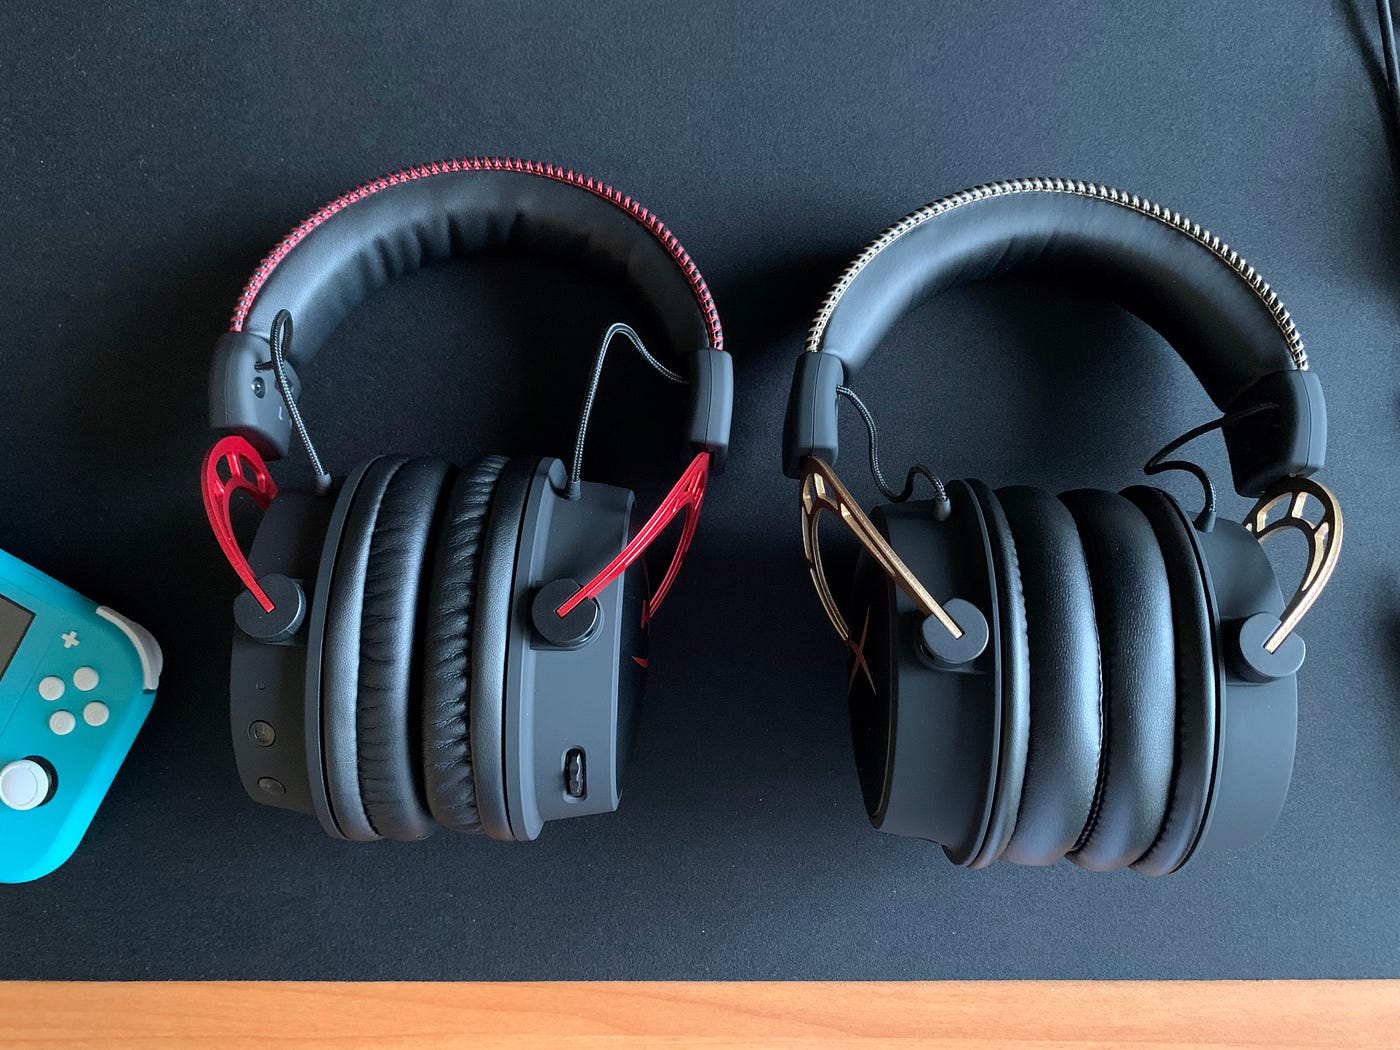 HyperX Cloud Alpha Wireless Gaming Headset Review, by Alex Rowe